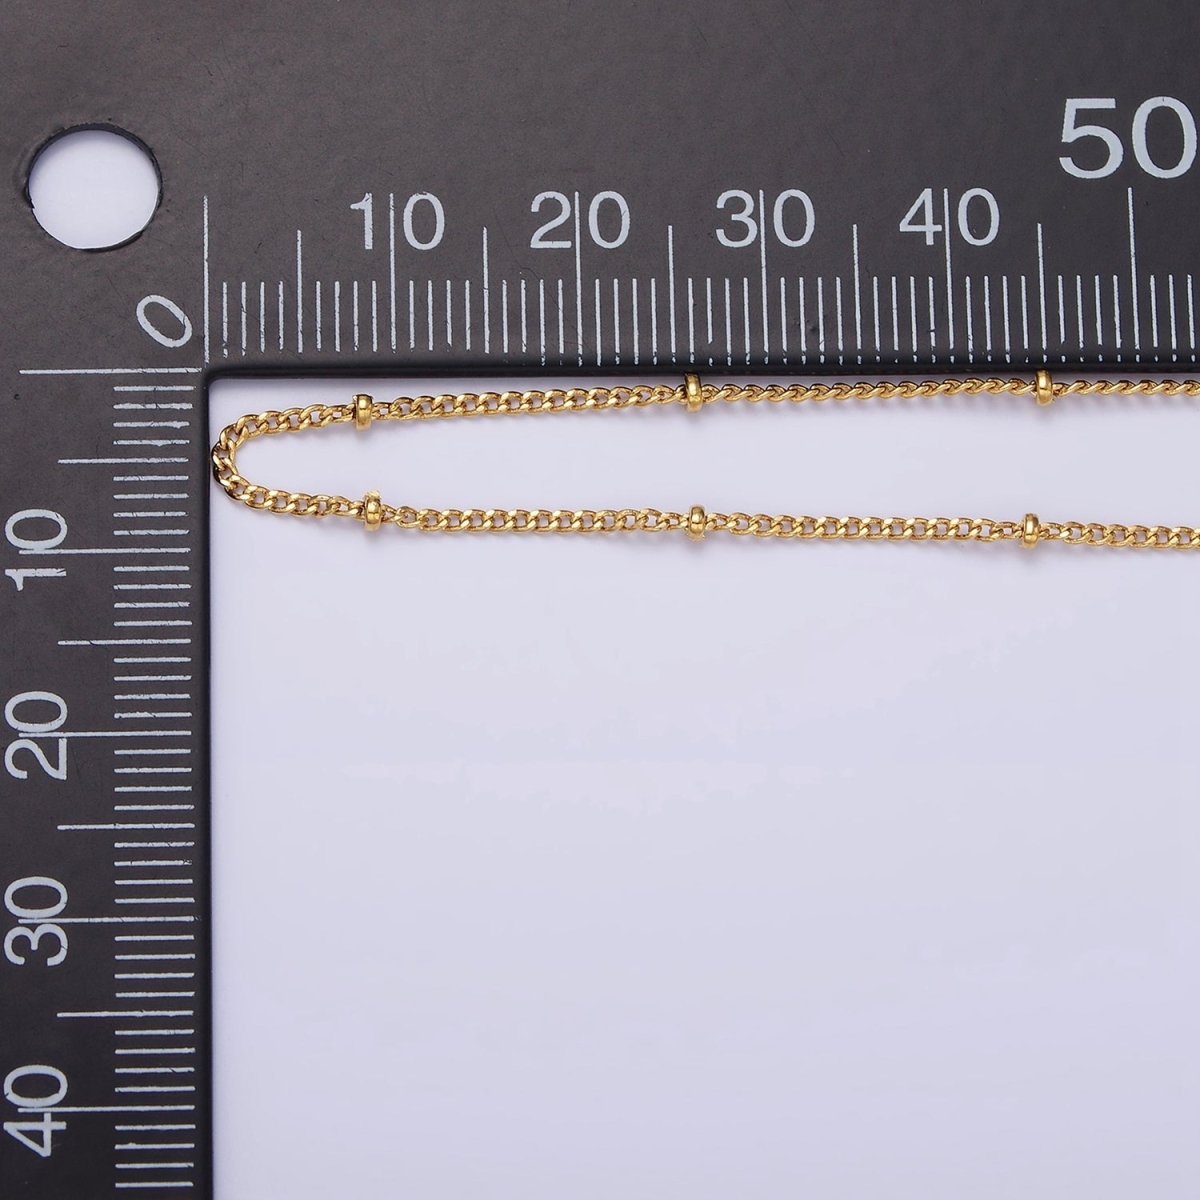 24K Gold Filled Beaded Cable Chain Necklace, Silver Gold Satellite Chain Necklace 18 inch | WA-1843 WA-1844 Clearance Pricing - DLUXCA